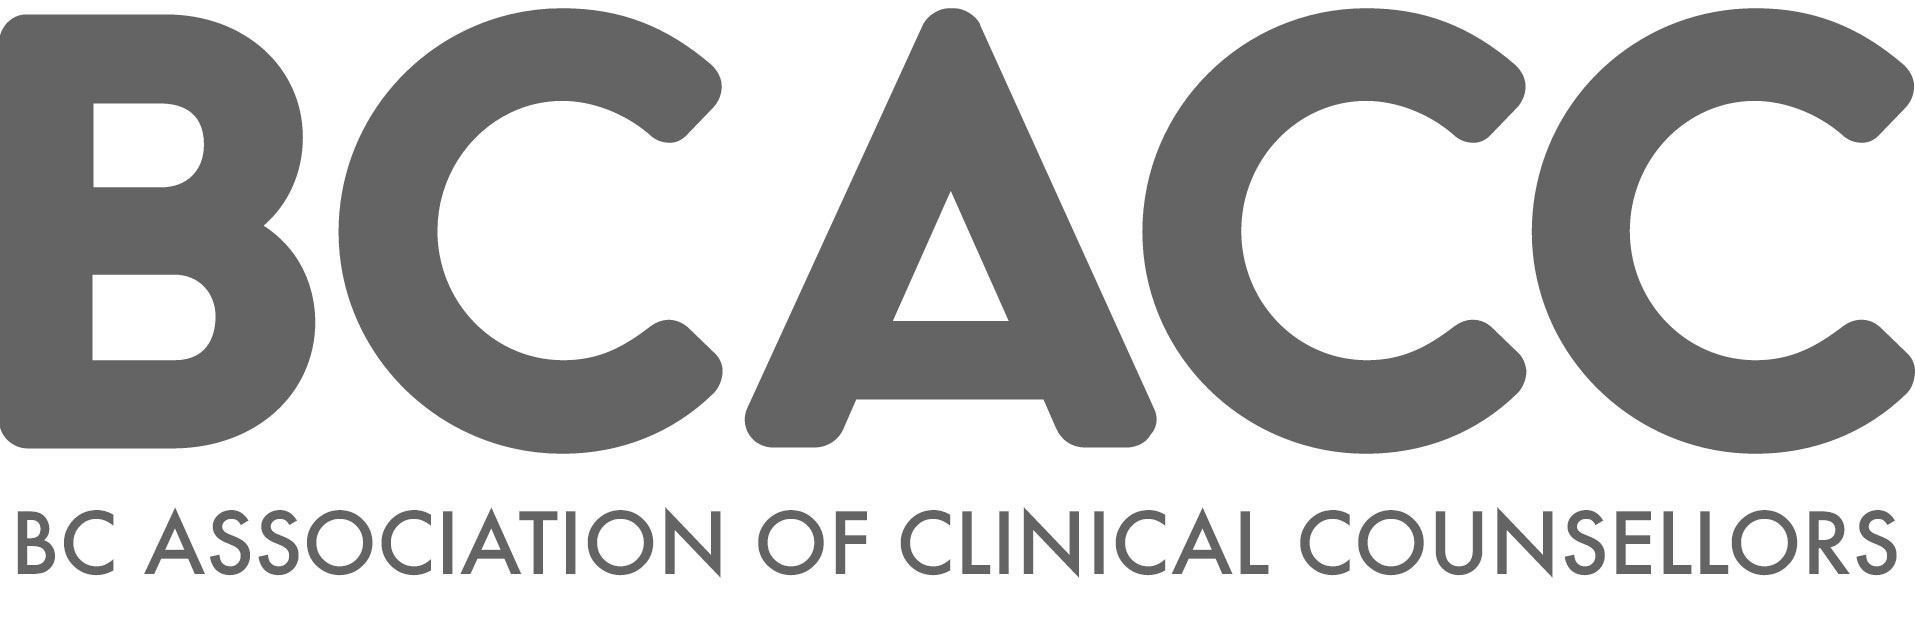 BC Association of Clinical Counsellors Logo (Copy) (Copy)